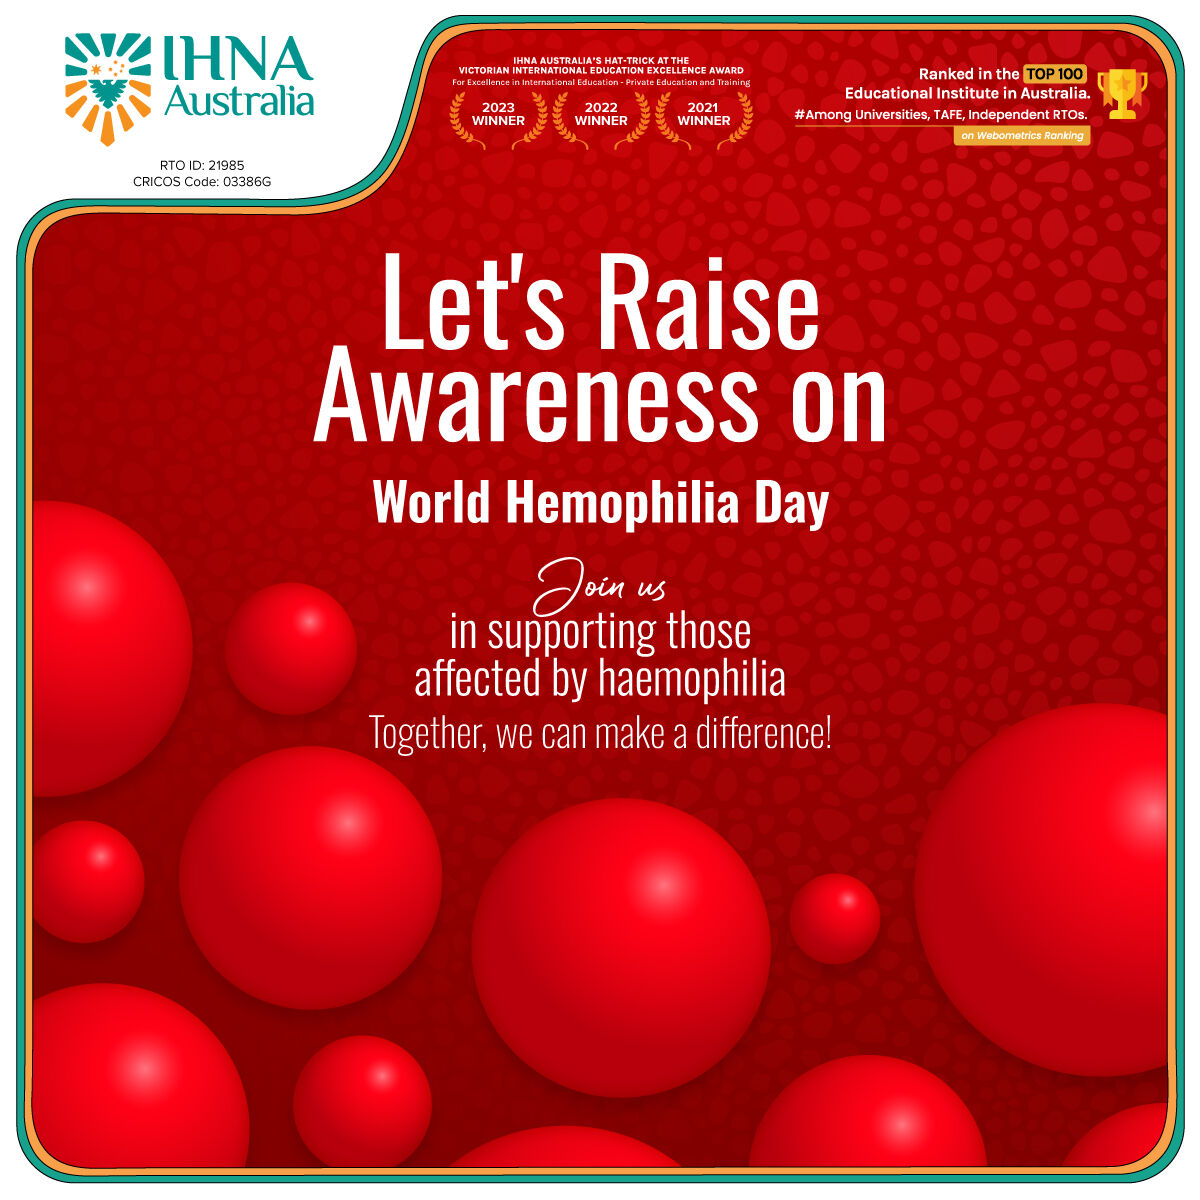 This World Hemophilia Day, IHNA Australia is proud to stand with the hemophilia community. Join us in spreading awareness and advocating for better care and support.
 
#IHNA #IHNAAustralia #WHD2024 #WorldHemophiliaDay #RaiseAwareness